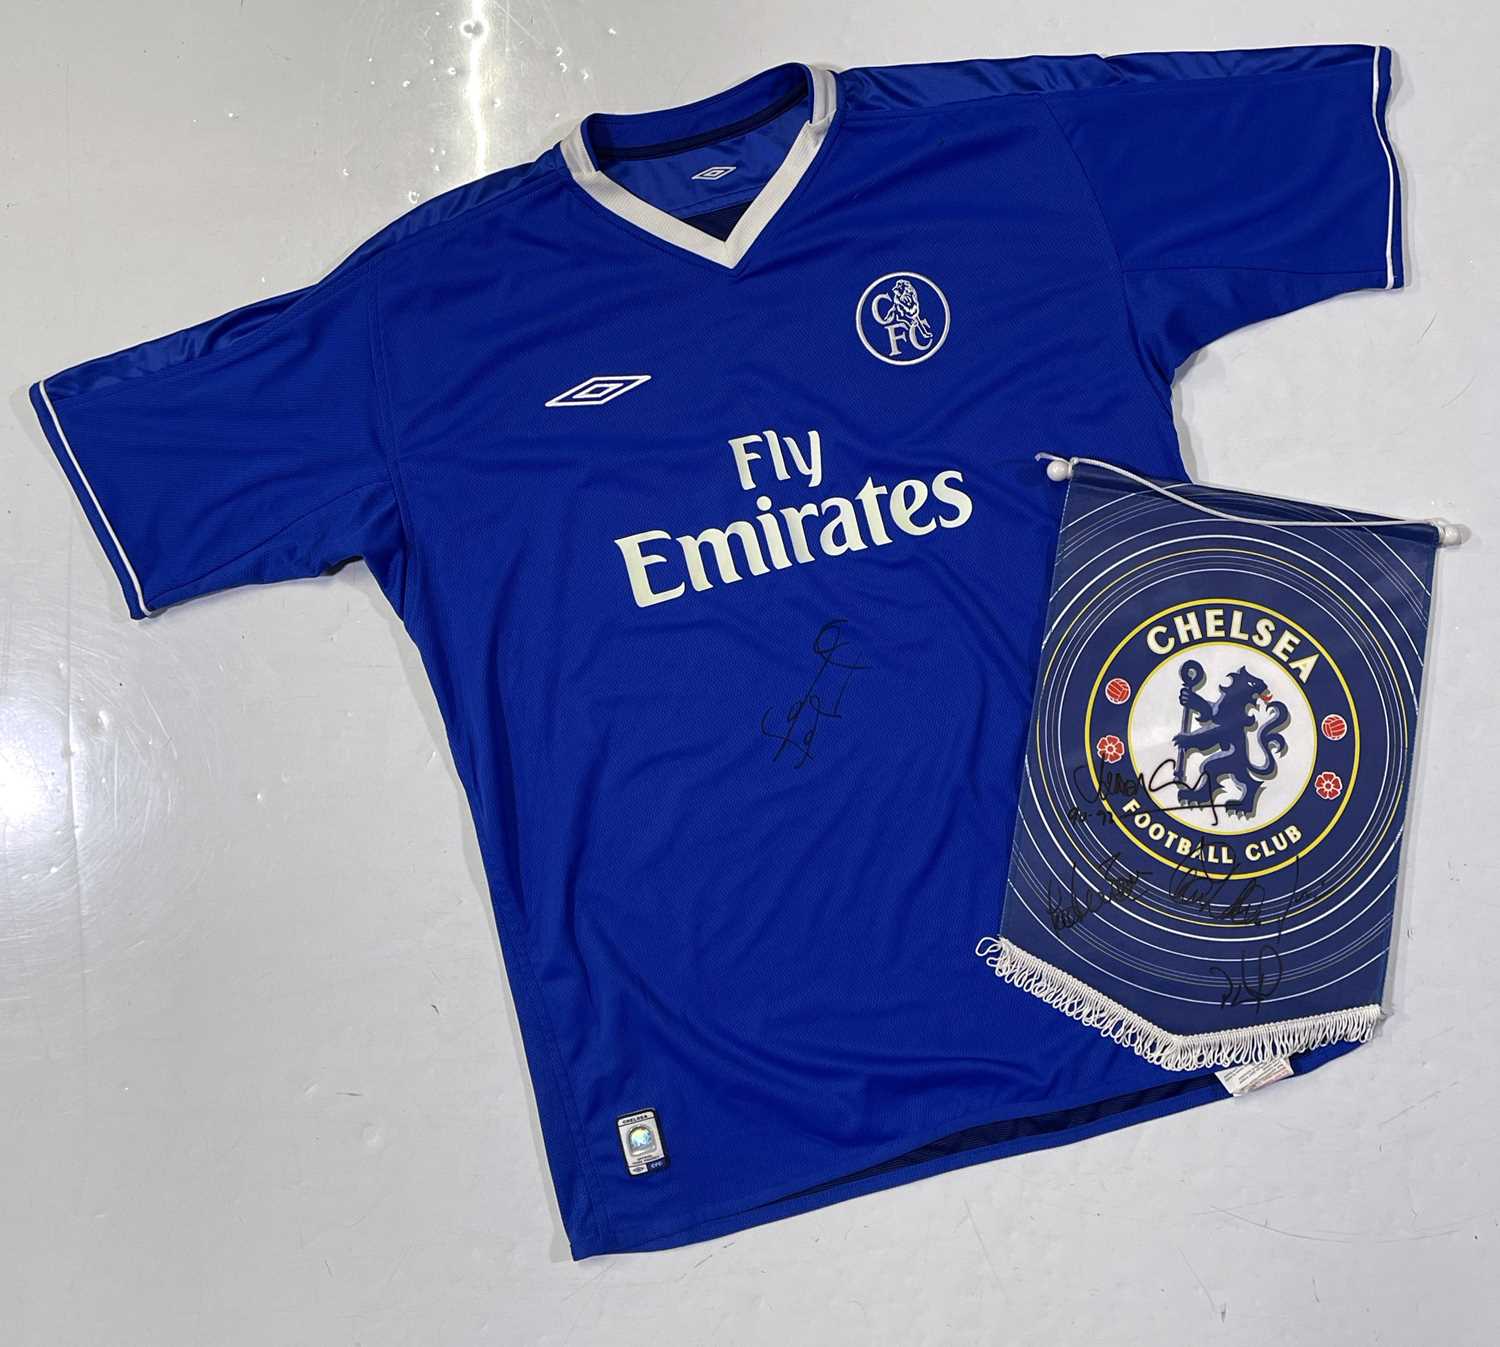 CHELSEA FC - SIGNED SHIRT AND PENNANT.